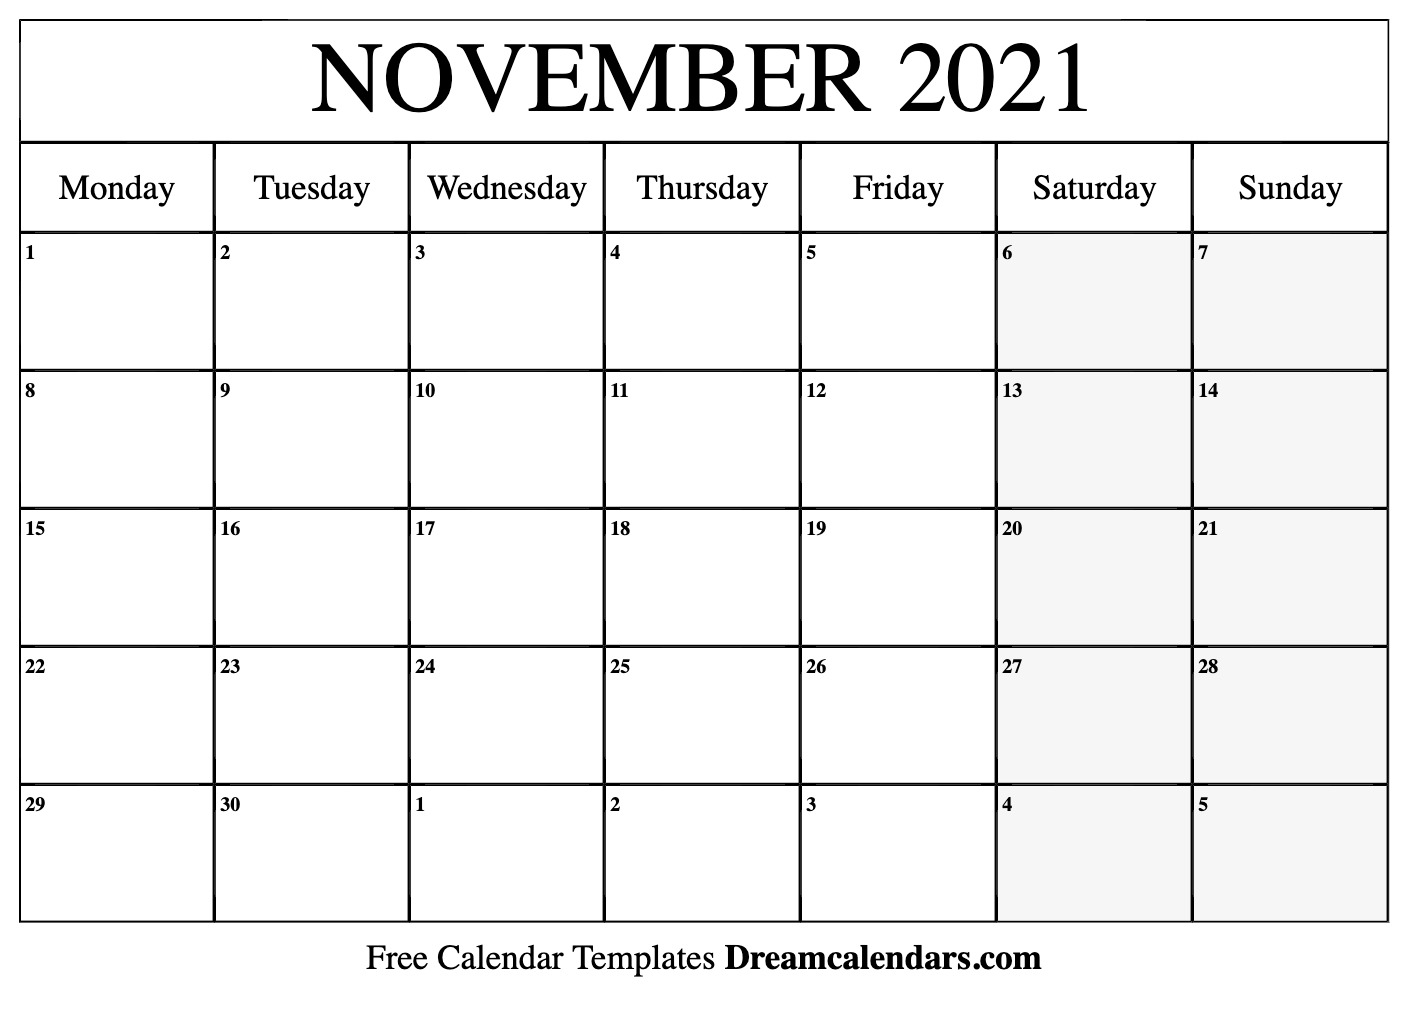 November 2021 Calendar - Free Printable with Holidays and Observances